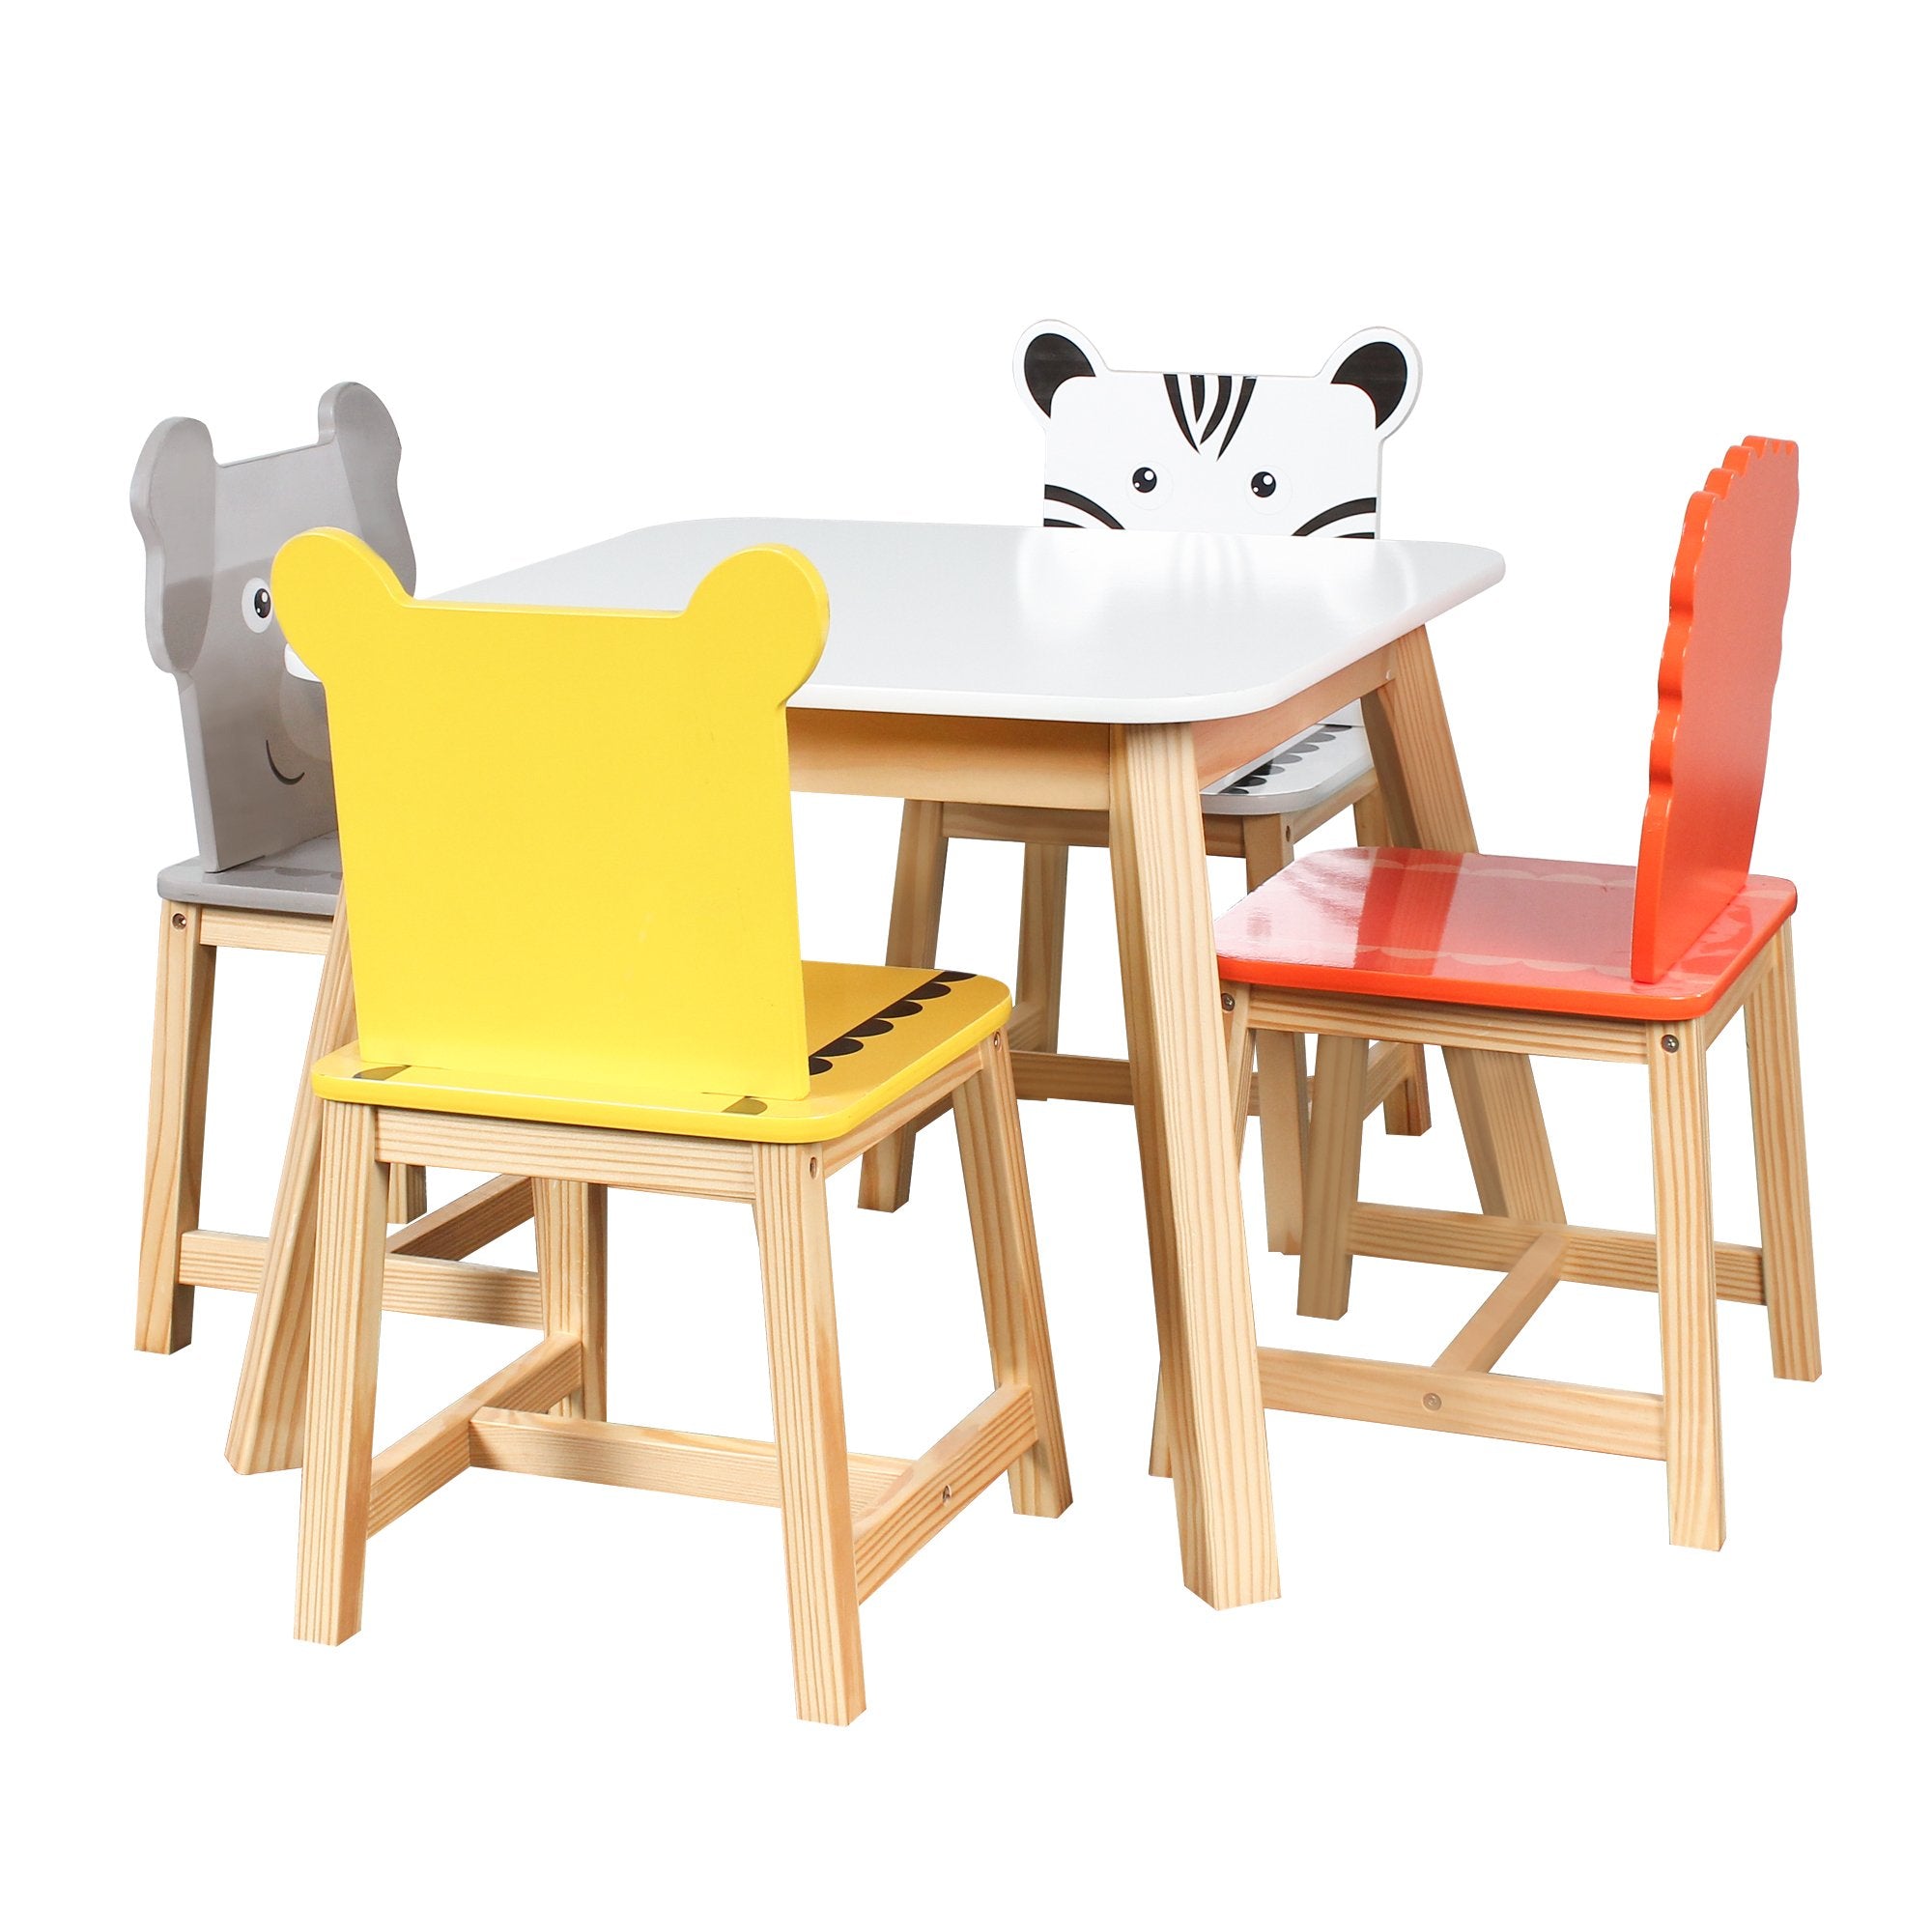 5 Piece Kiddy Table and Chair Set with Cartoon Animals